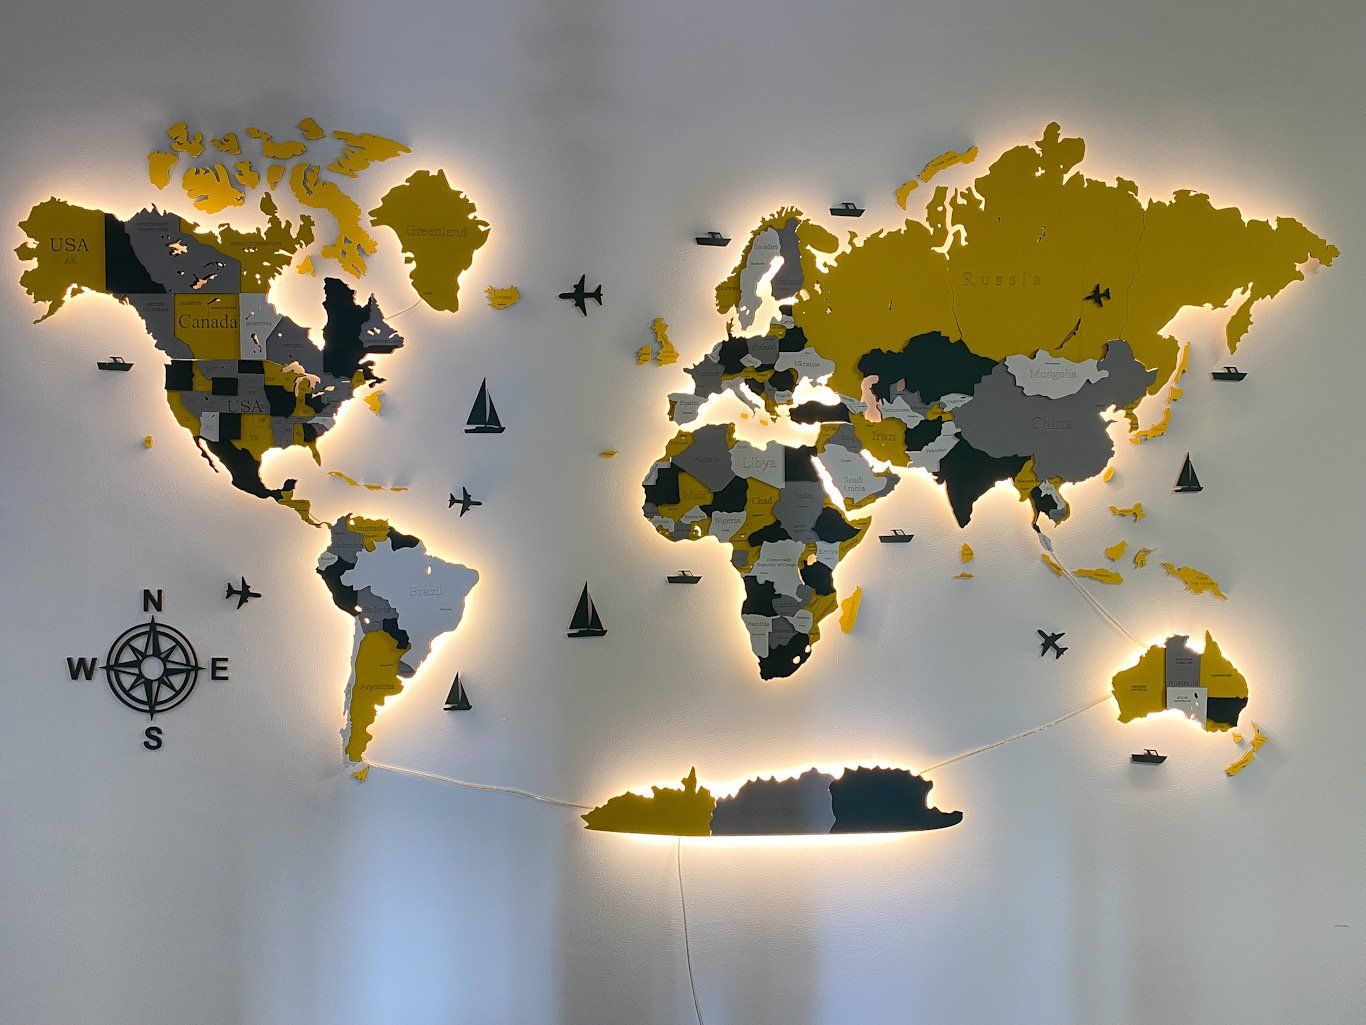 3D LED WOODEN WORLD MAP IN YELLOW AND GREEN COLORS WoodLeo